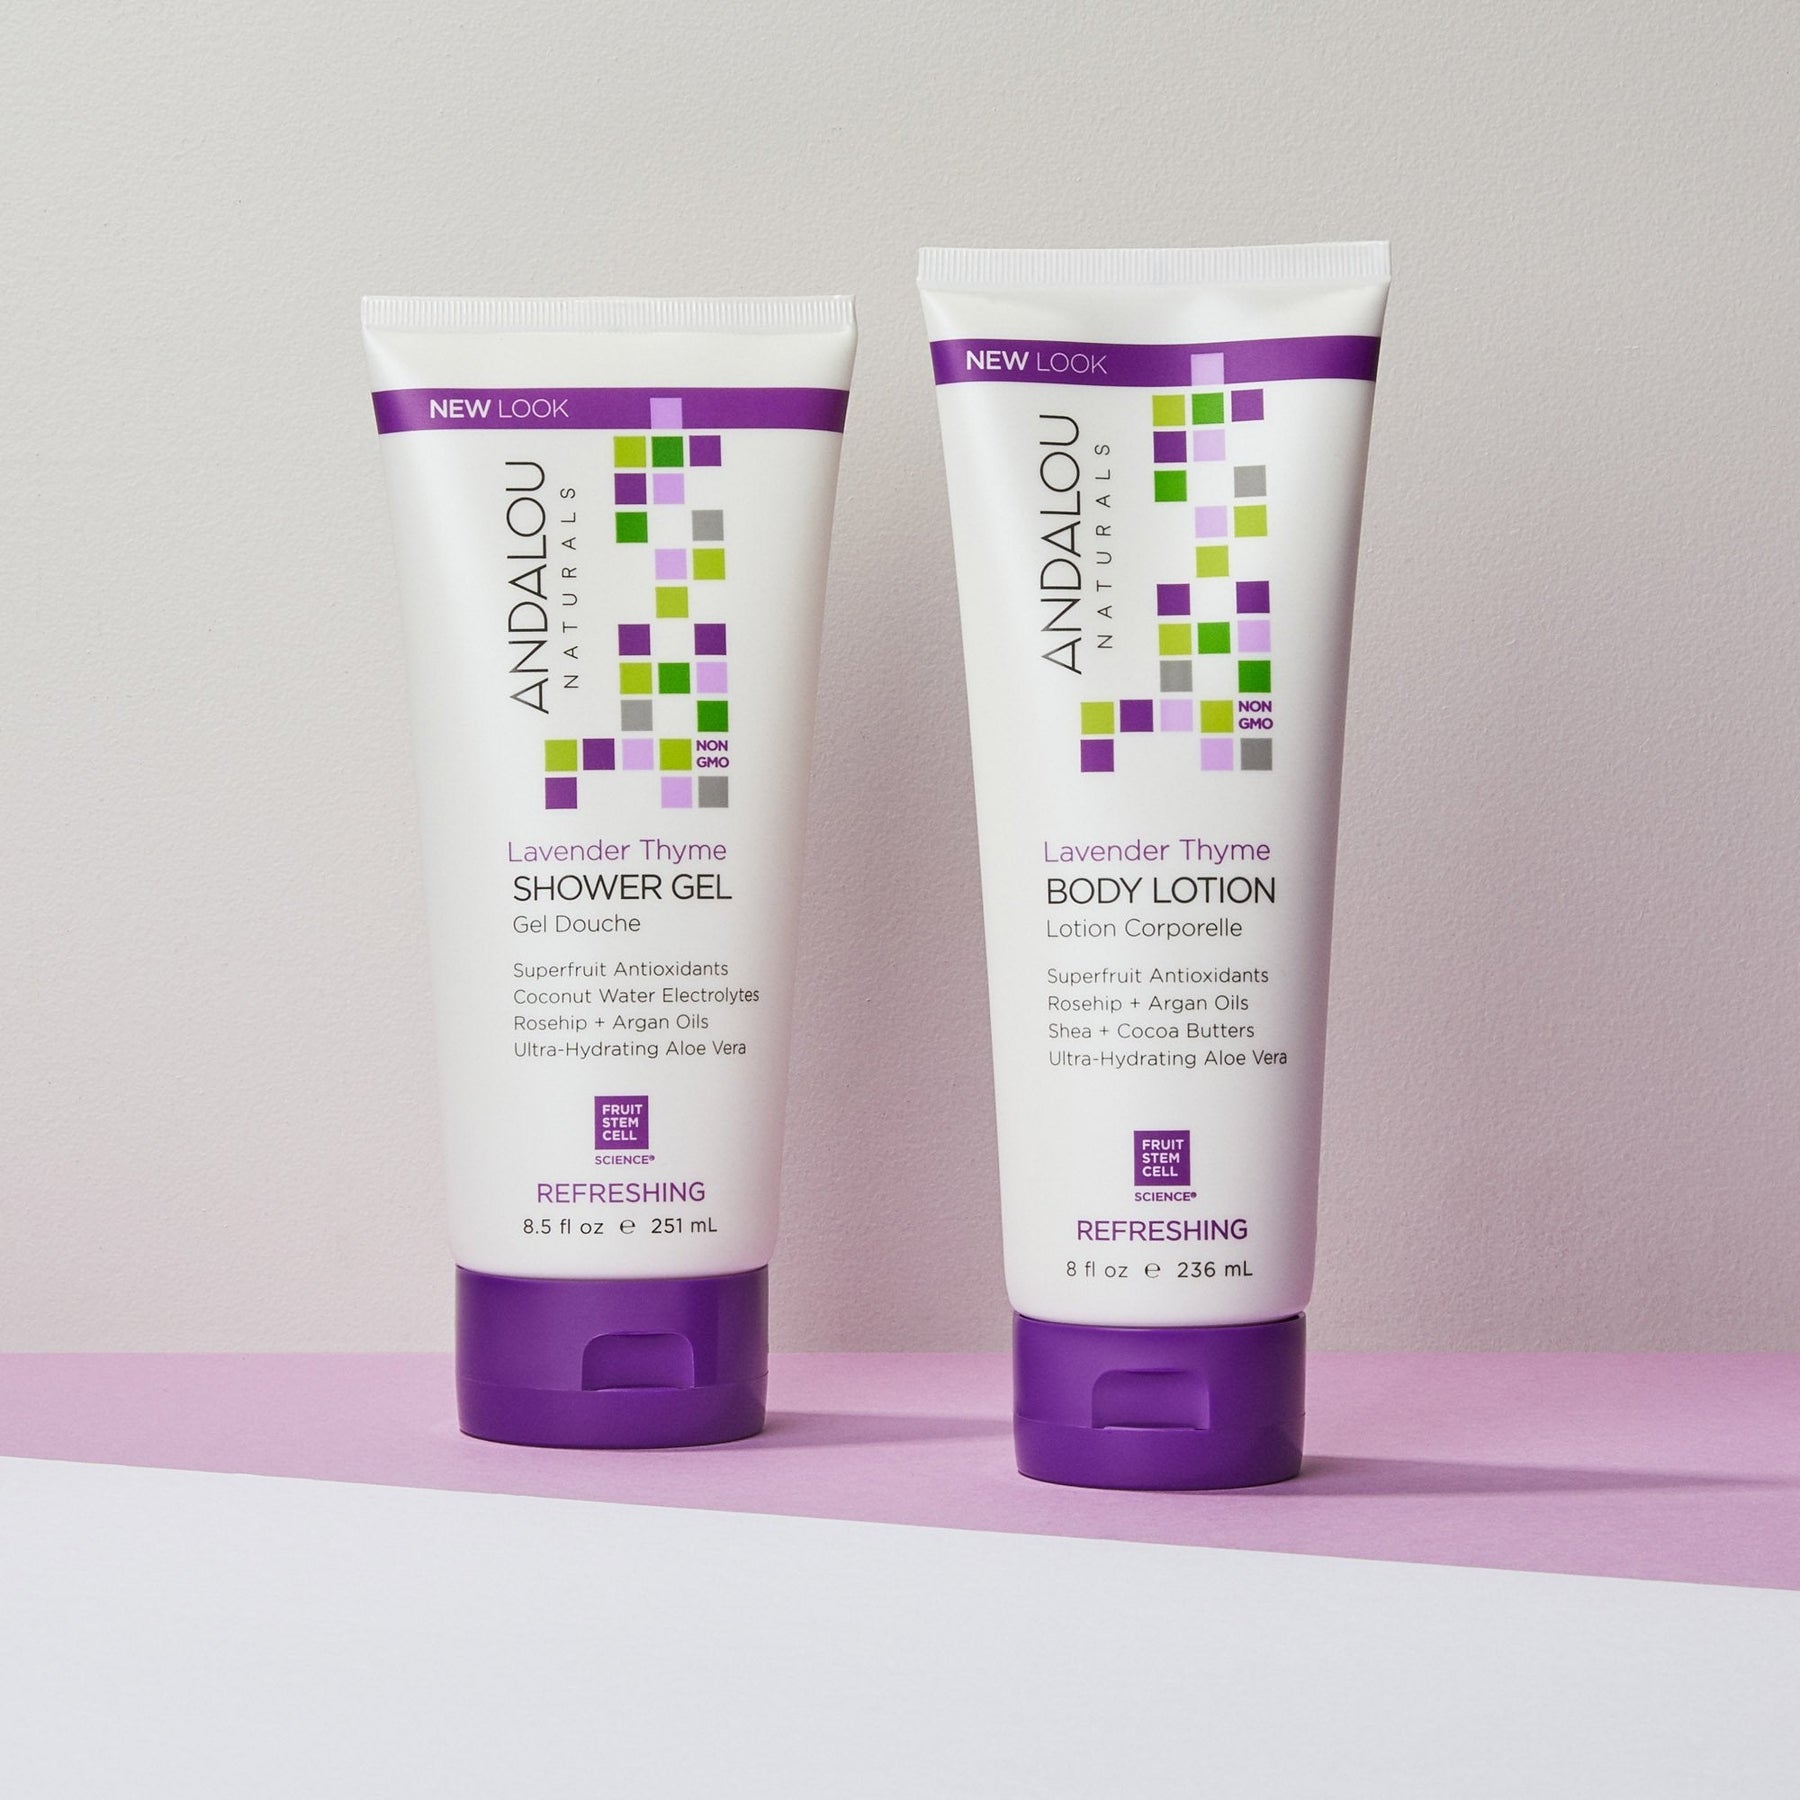 Lavender Thyme Refreshing Shower Gel - by Andalou Naturals |ProCare Outlet|